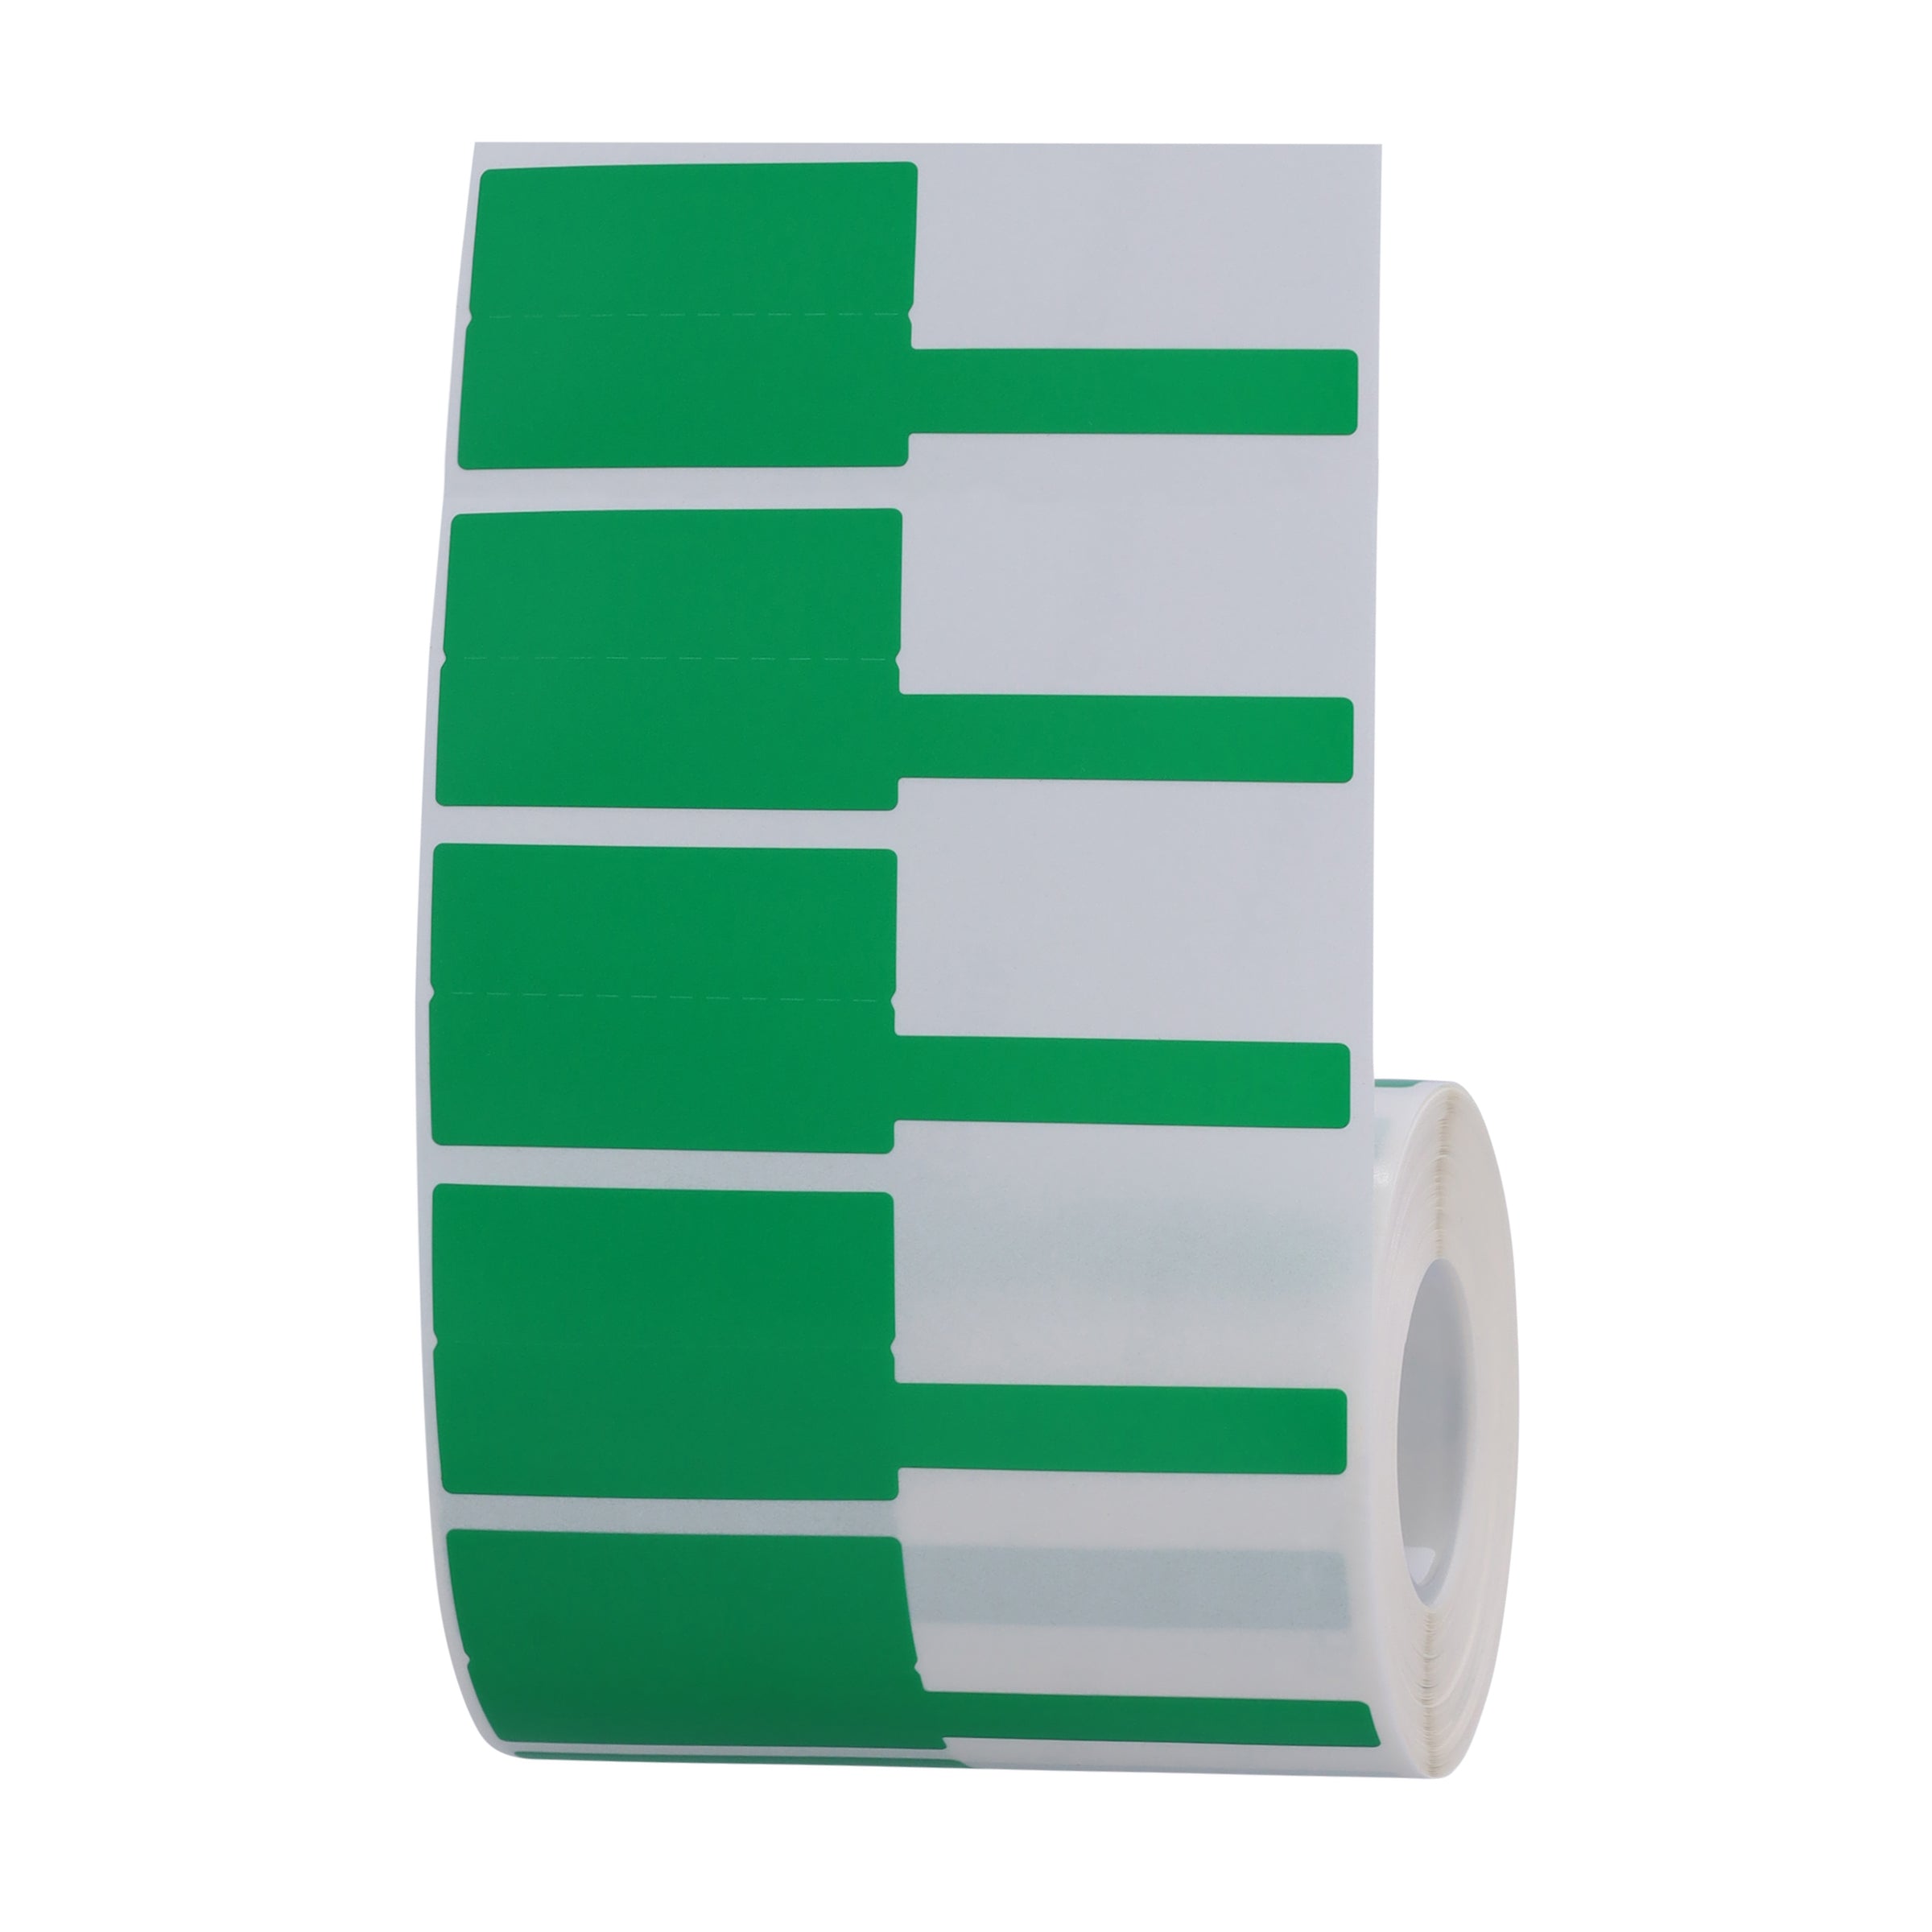 NB486 - NIIMBOT - Z401 ONLY - P38*25-450 THERMAL TRANSFER LABELS- GREEN CABLE